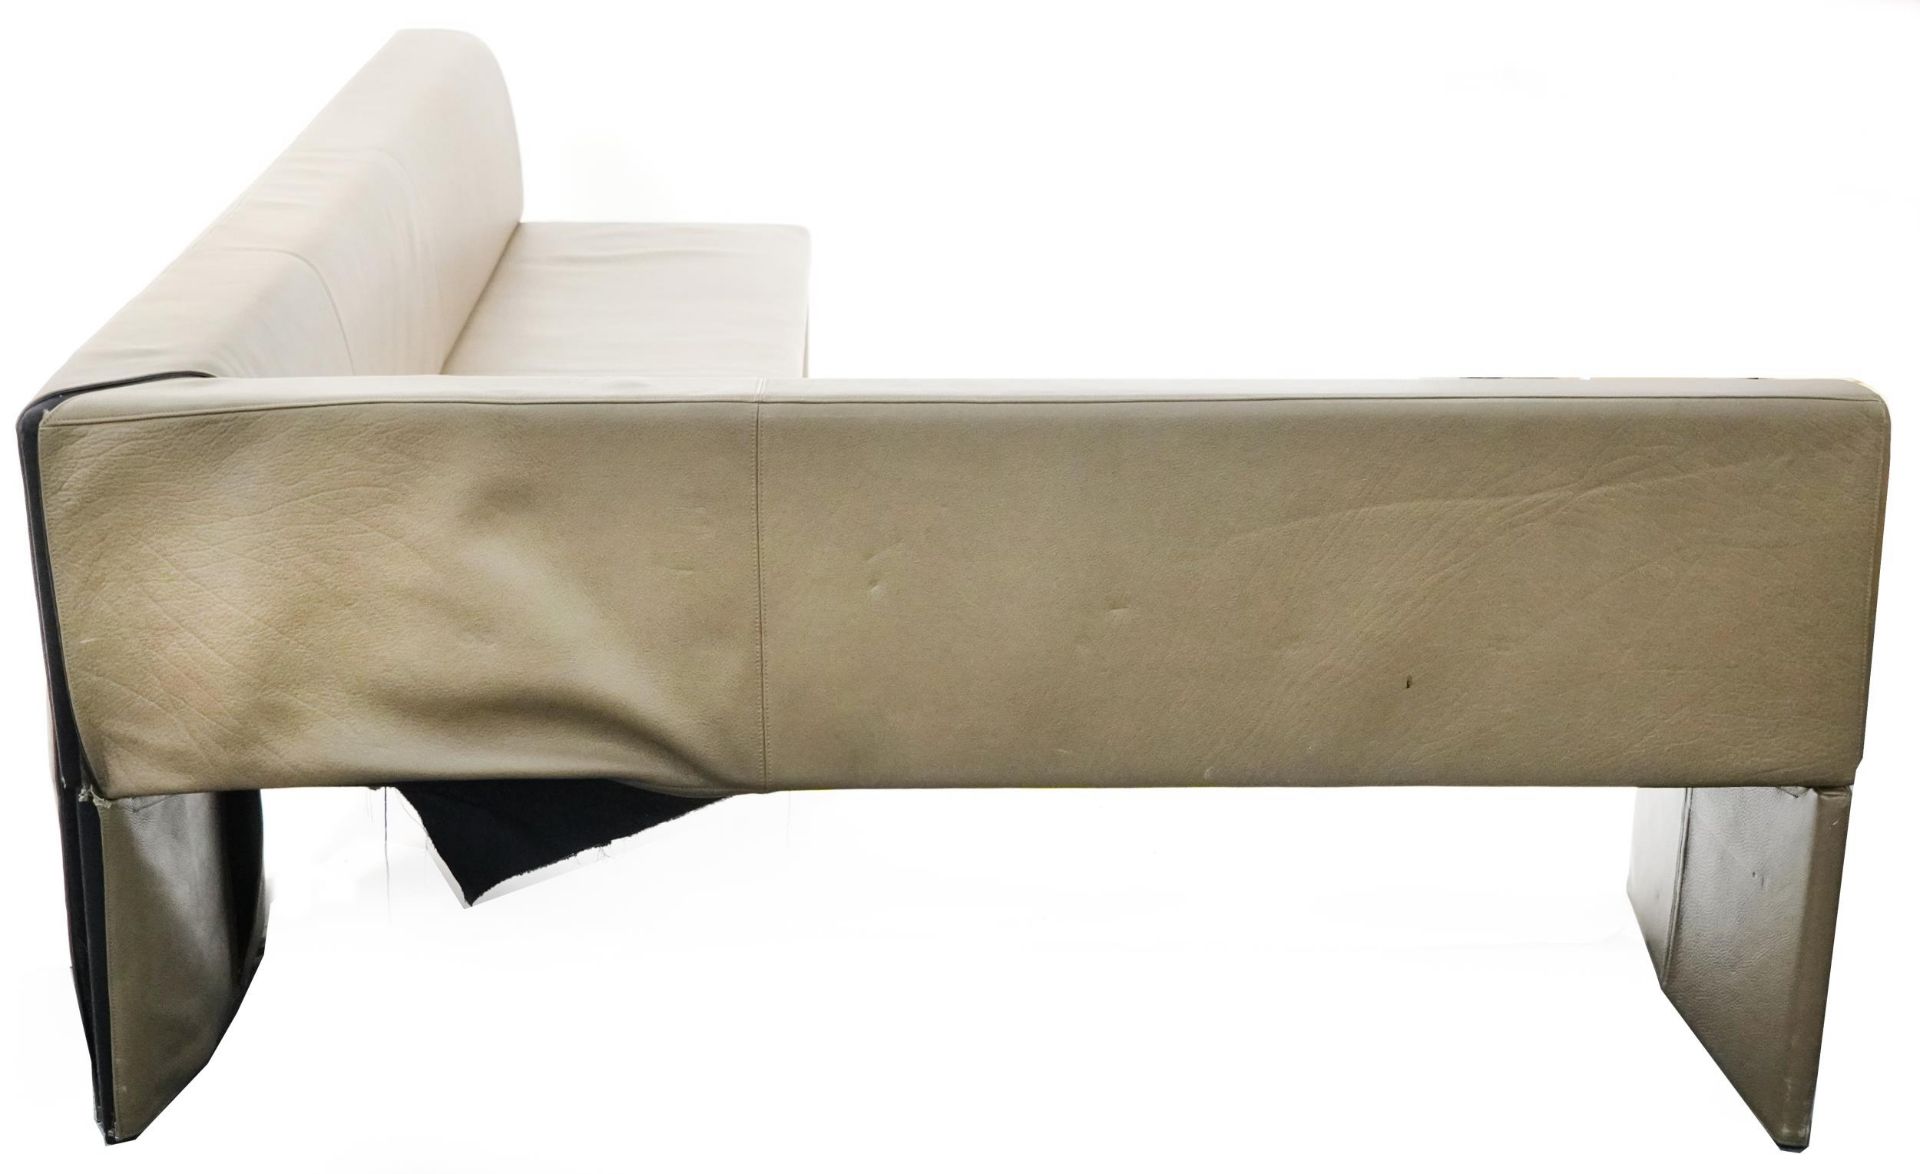 Contemporary Walter Knoll 290 corner seat bench settee with caffe latte leather upholstery, 77cm H x - Image 6 of 7